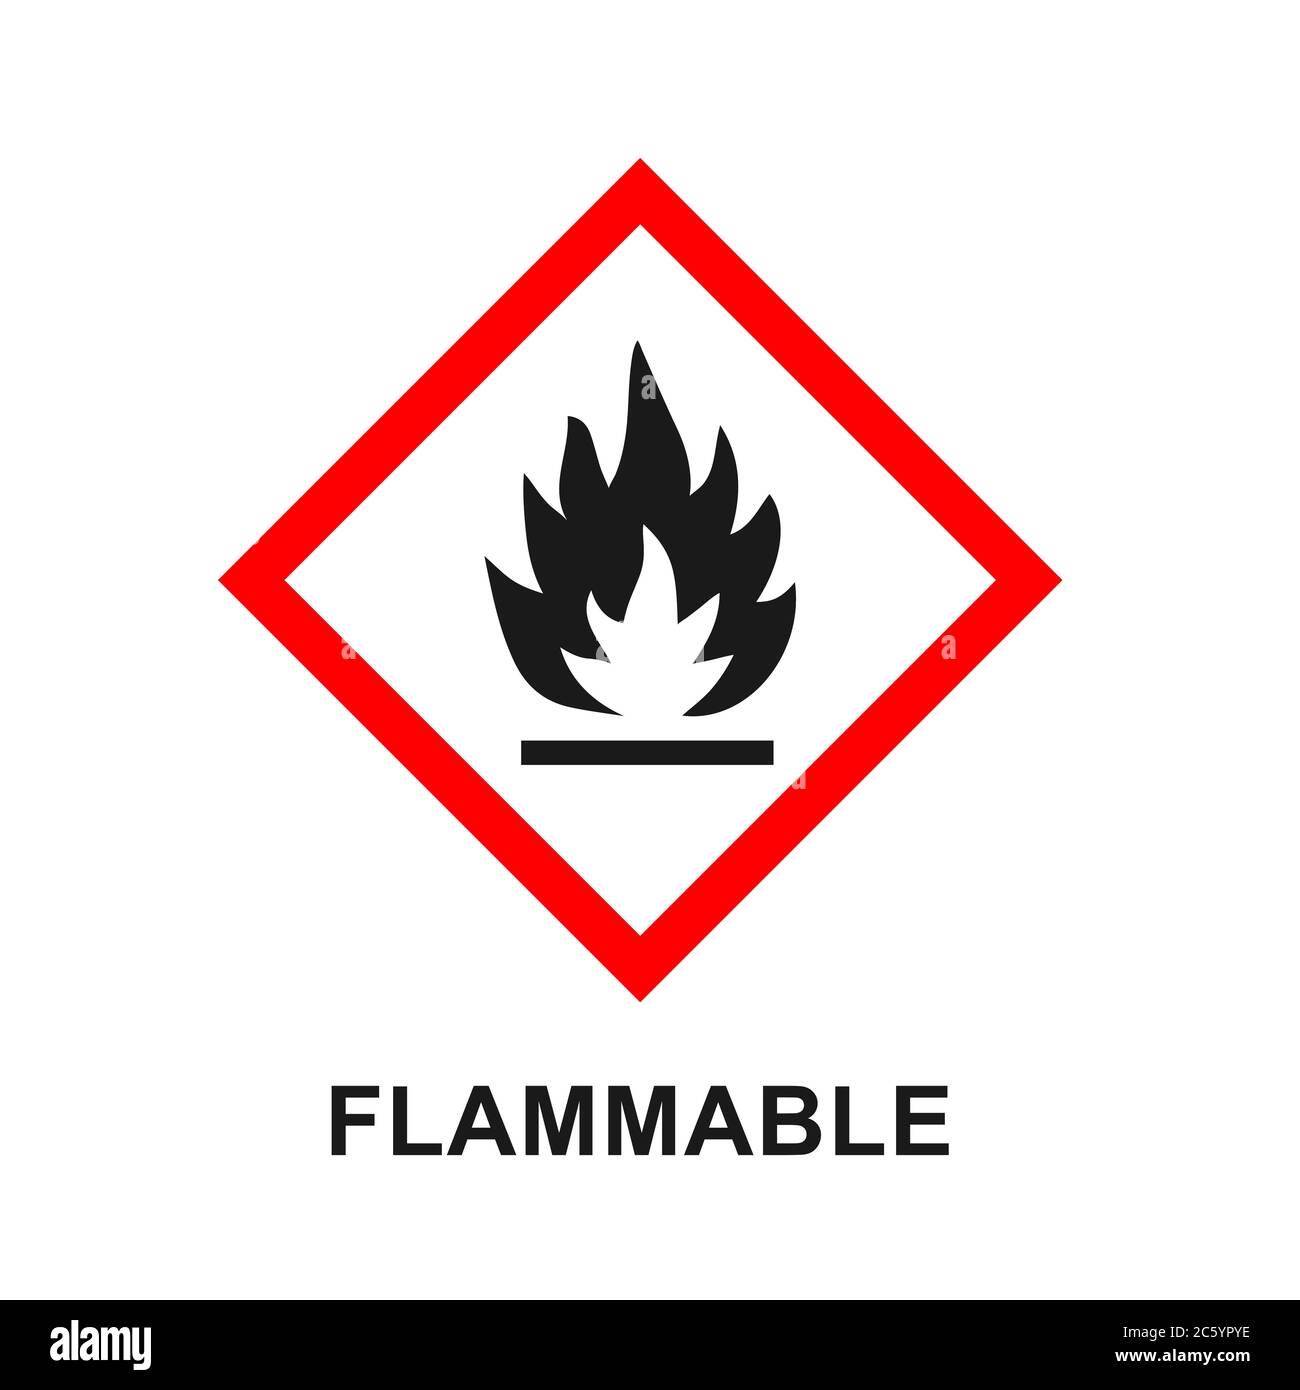 Flammable packaging icon. Flame fire logo symbol. Warning danger sign. Vector illustration image. Isolated on white background. Stock Vector